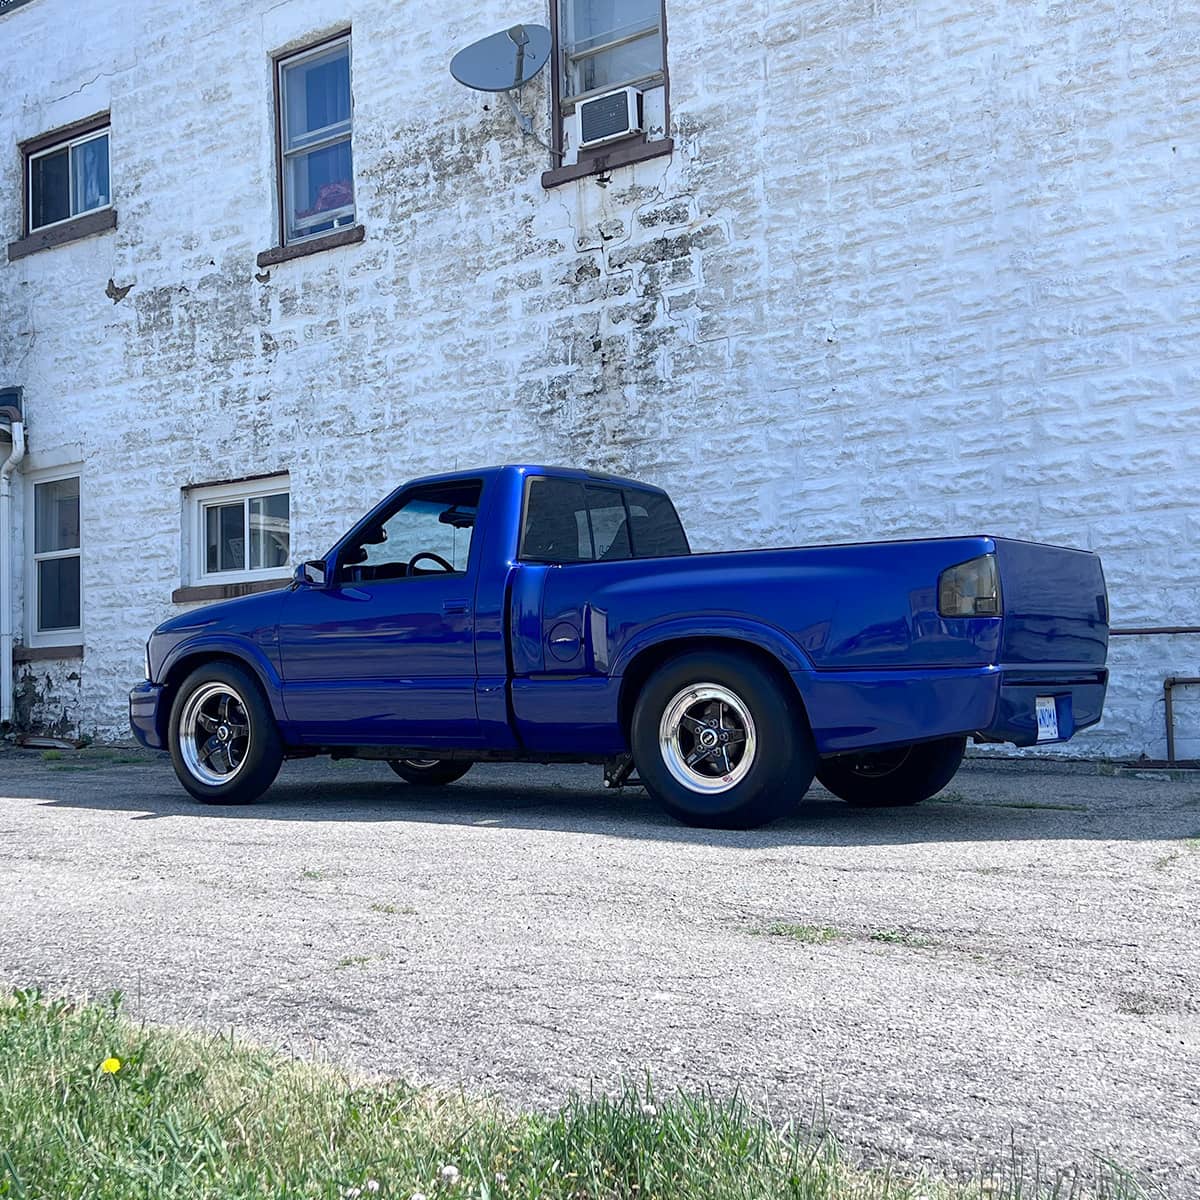 Modded GMC Sonoma custom painted in electric blue color